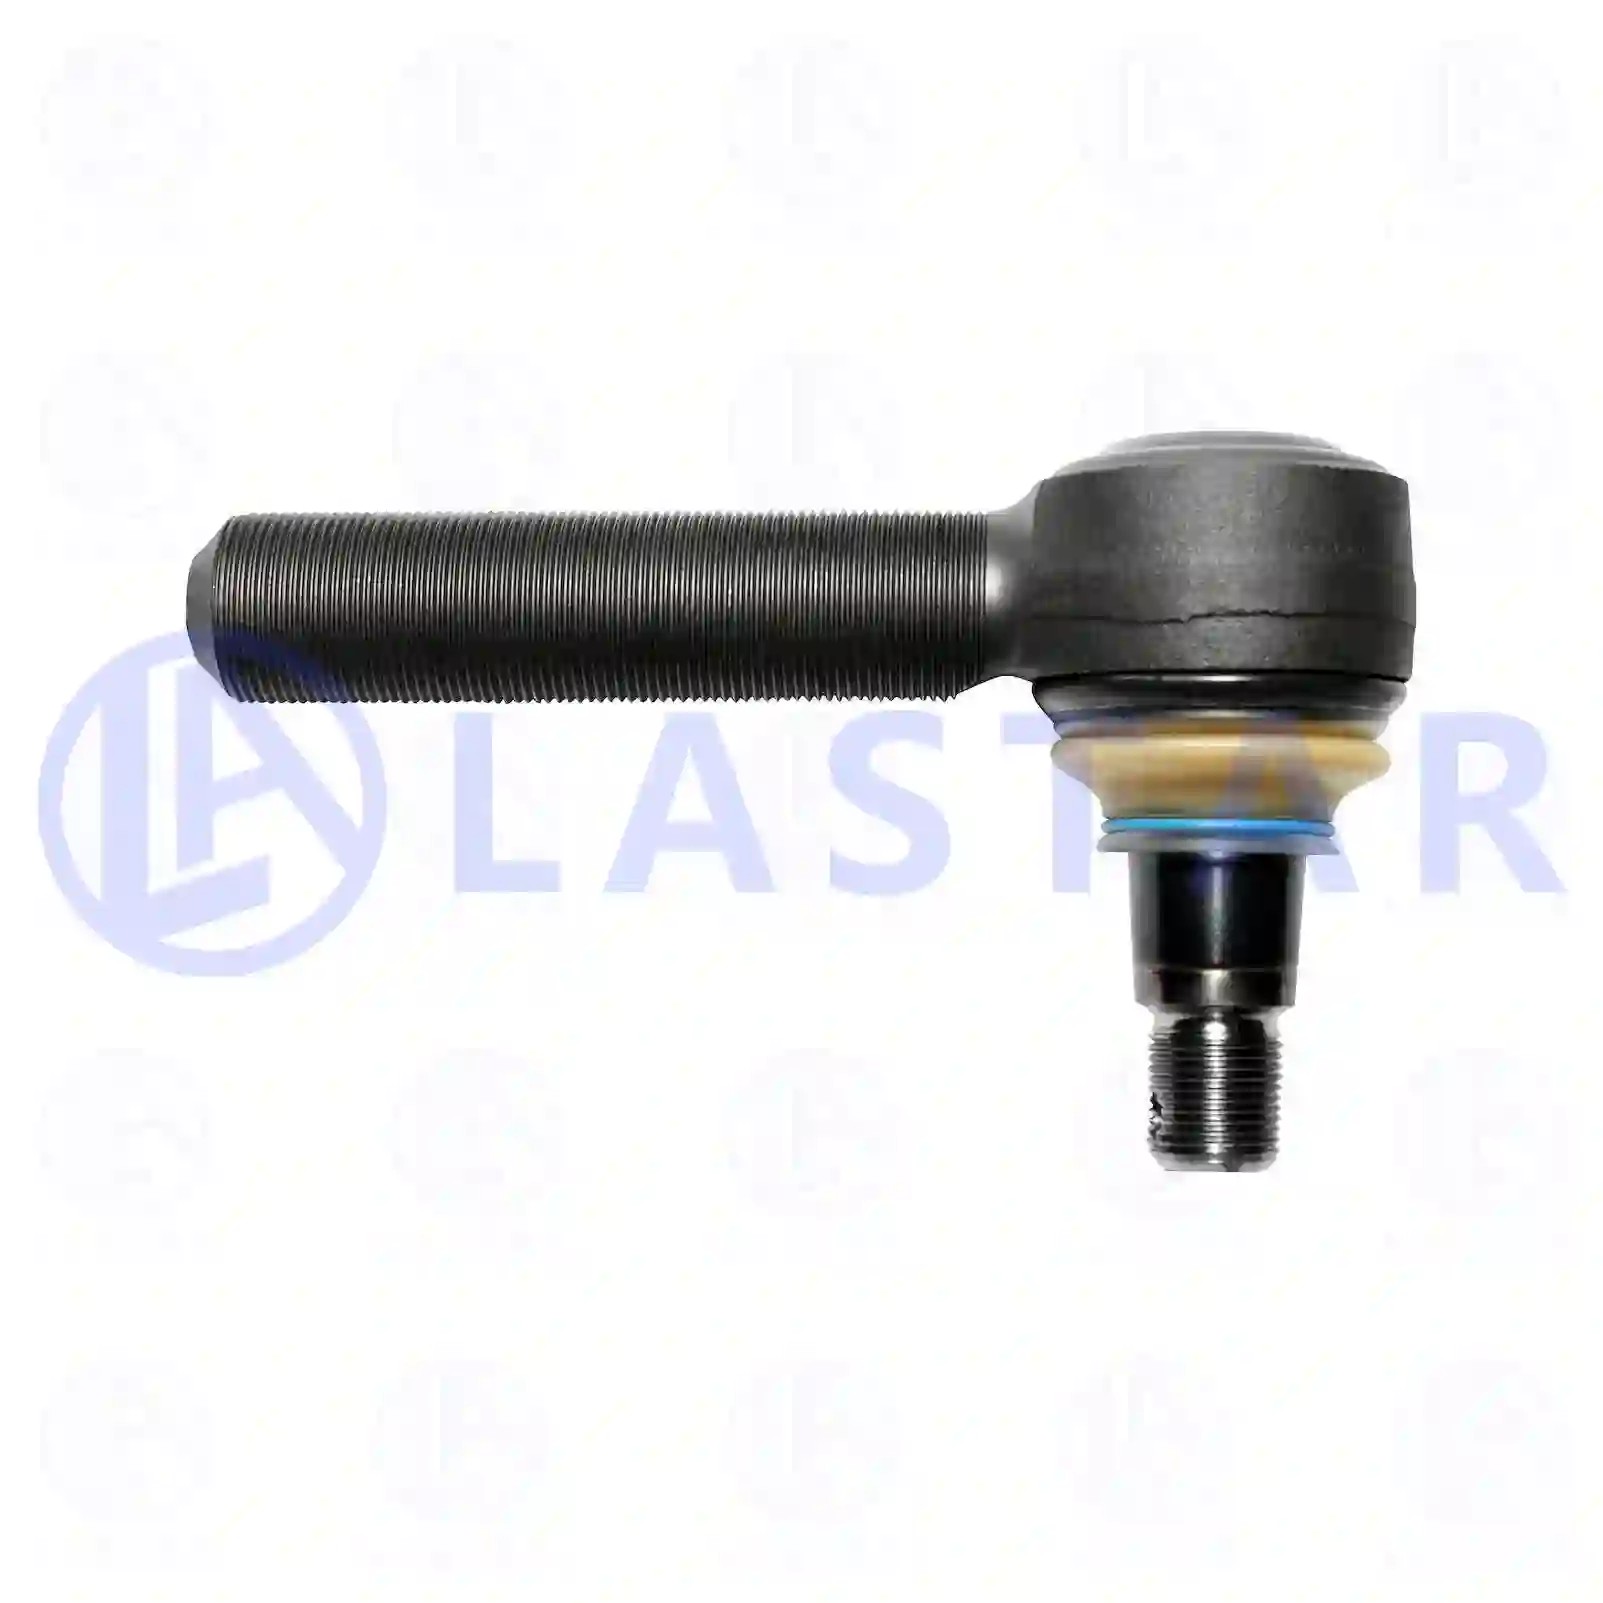 Ball joint, left hand thread, 77705614, 1604247, 1703473, 1705908, 1902996, ZG40359-0008 ||  77705614 Lastar Spare Part | Truck Spare Parts, Auotomotive Spare Parts Ball joint, left hand thread, 77705614, 1604247, 1703473, 1705908, 1902996, ZG40359-0008 ||  77705614 Lastar Spare Part | Truck Spare Parts, Auotomotive Spare Parts